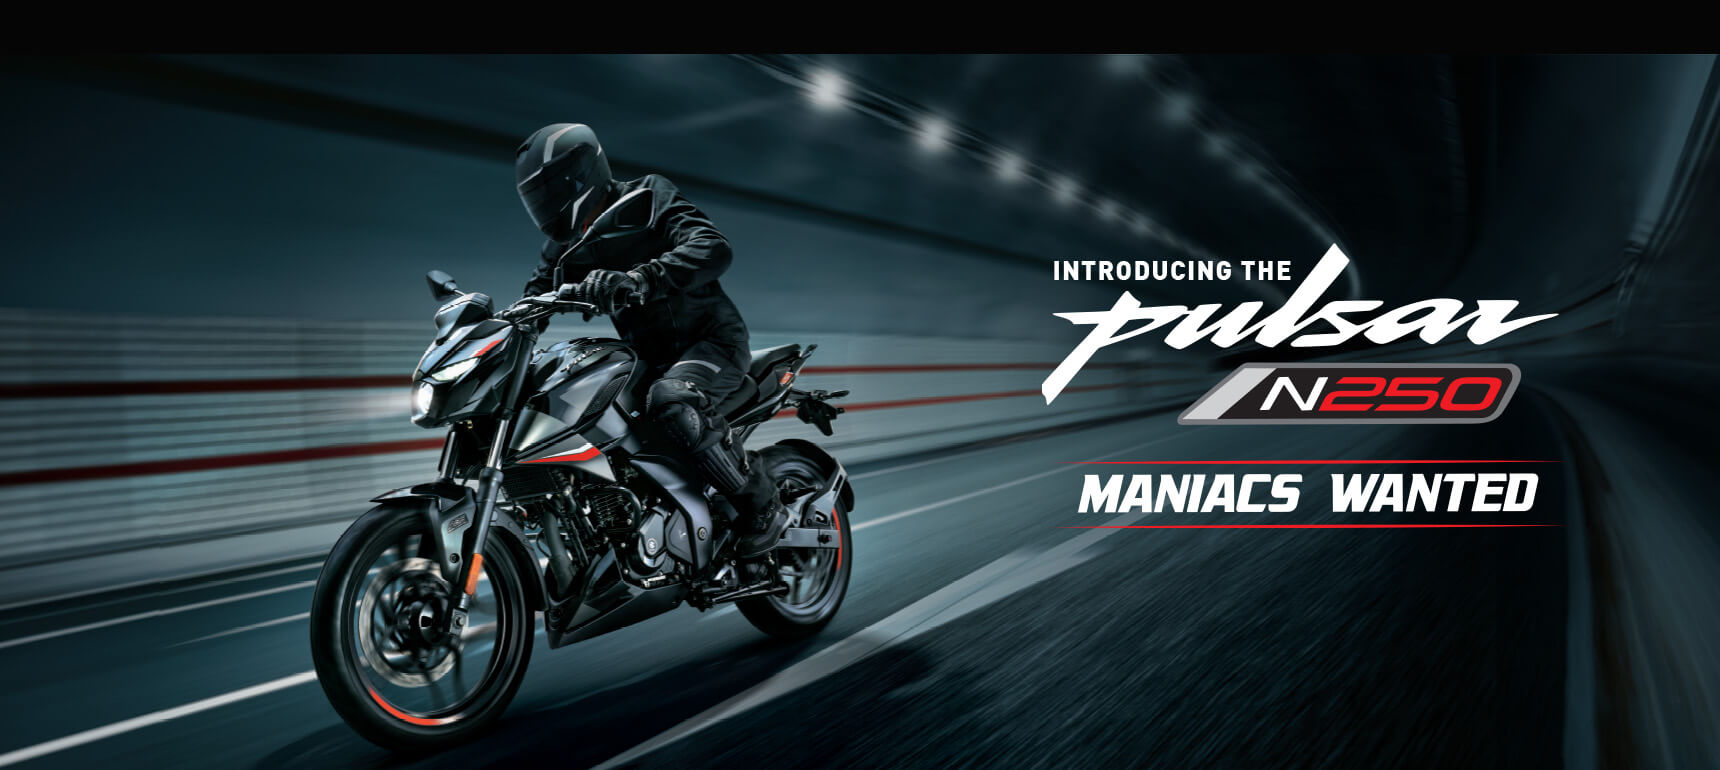 The all-new Pulsar N250 Bangladesh's first 250 cc with Dual Channel ABS